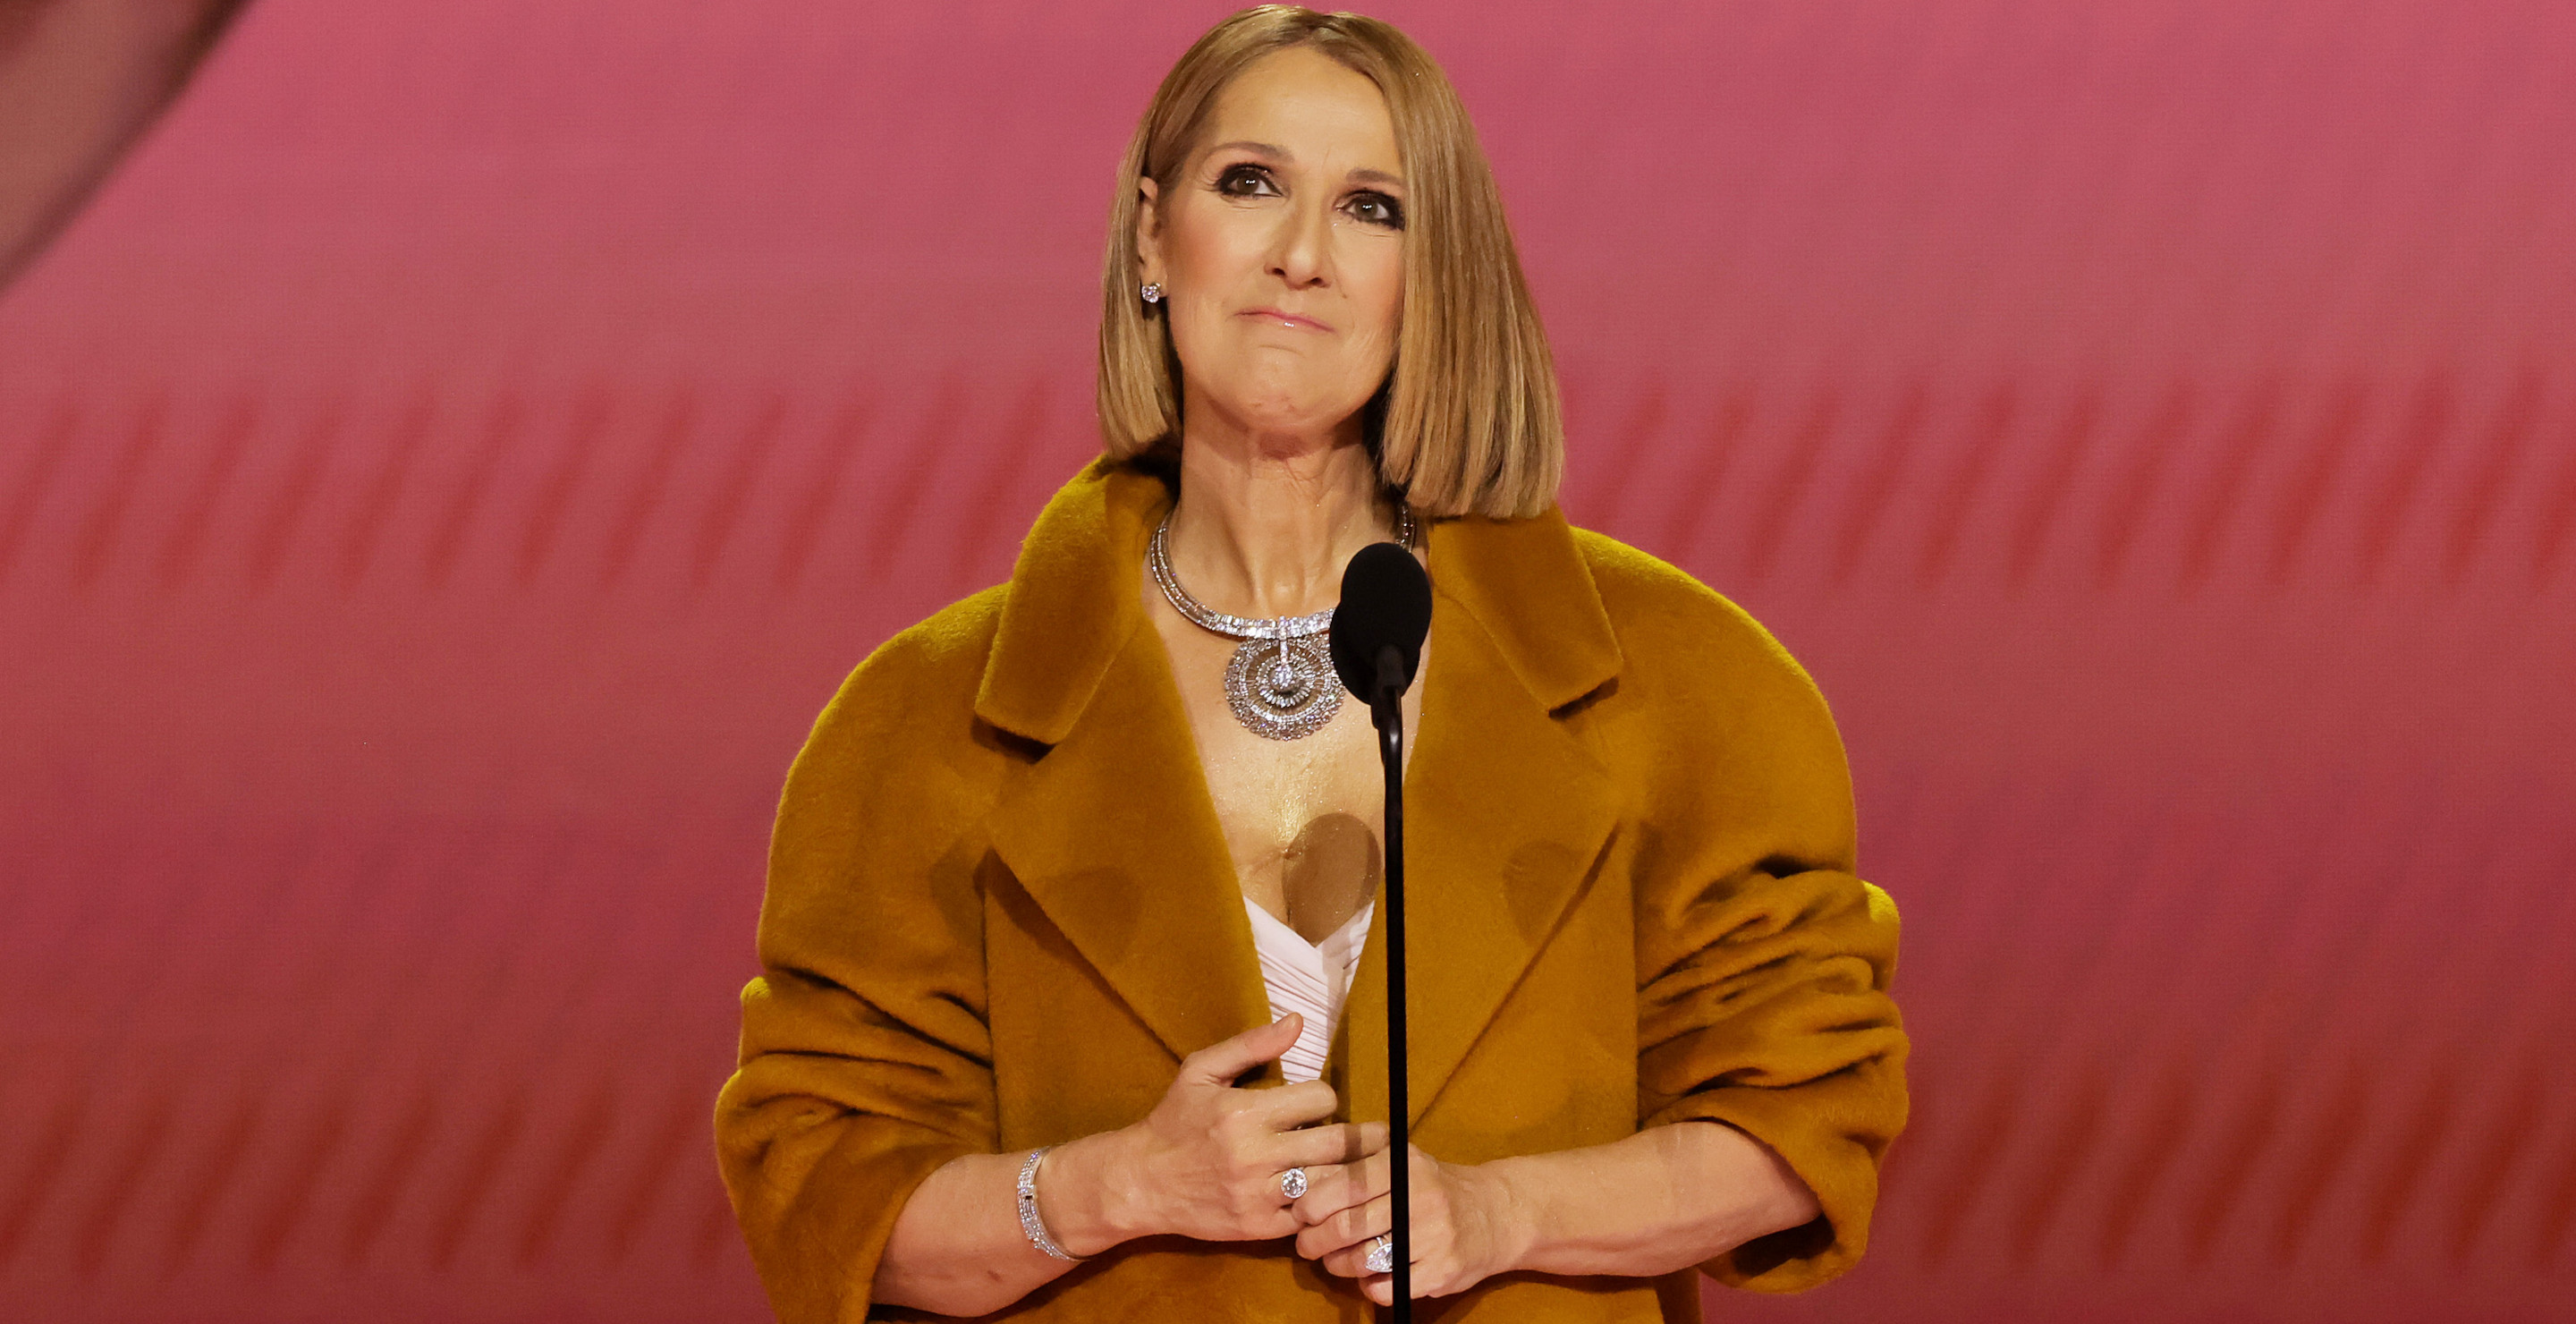 Celine Dion Says She Could Barely Walk And Suffered Broken Ribs As She Battles Stiff-Person Syndrome